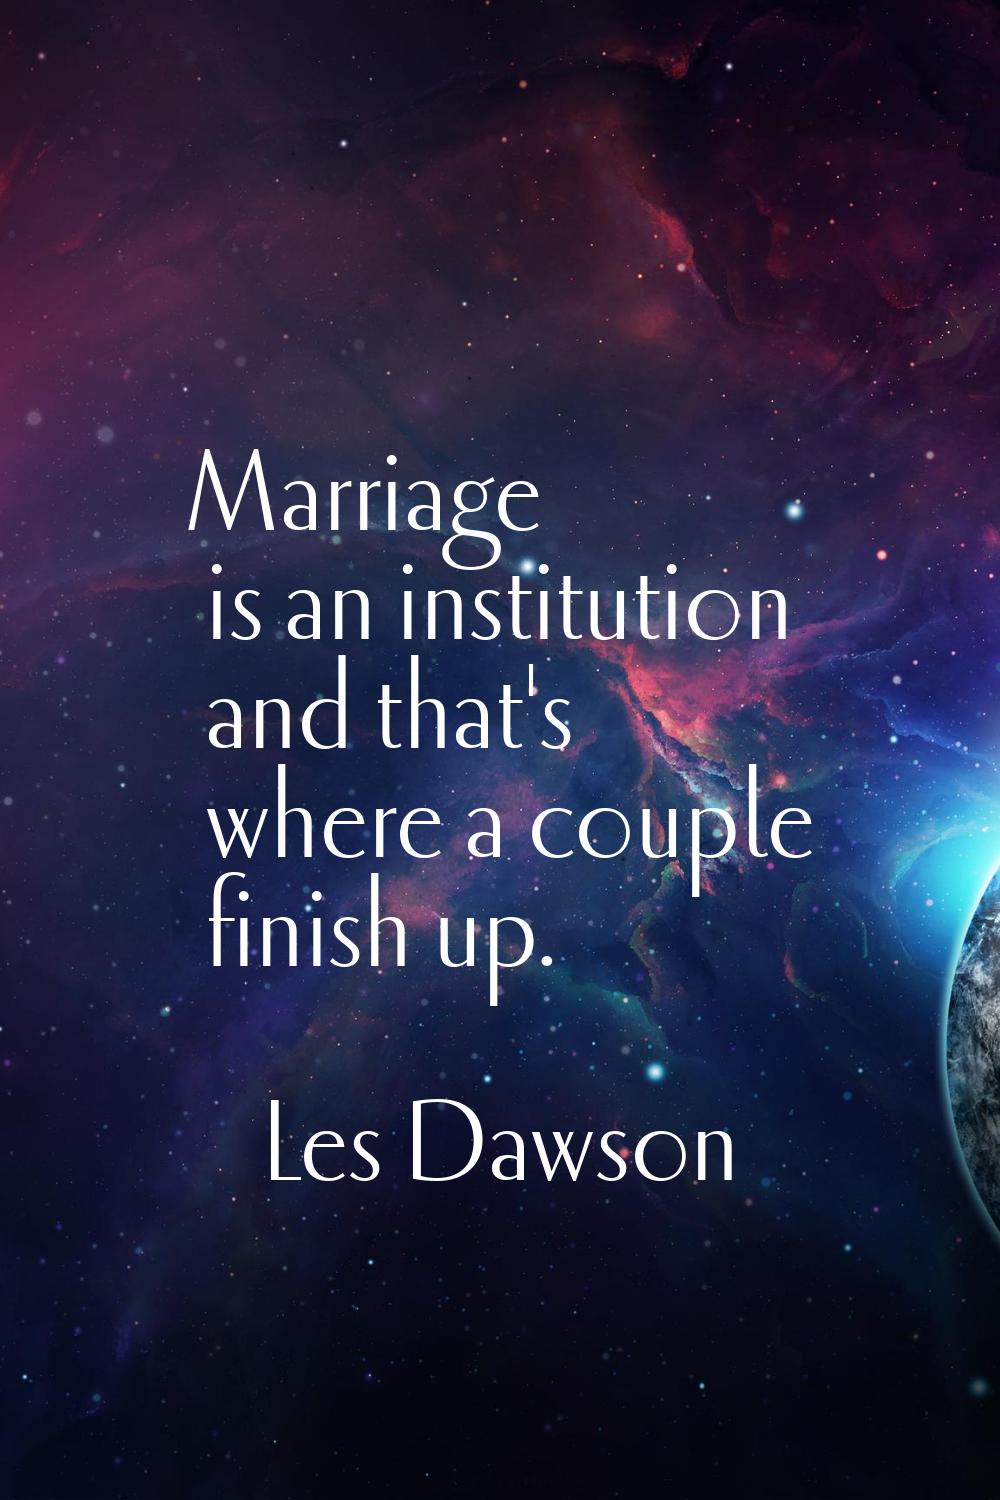 Marriage is an institution and that's where a couple finish up.